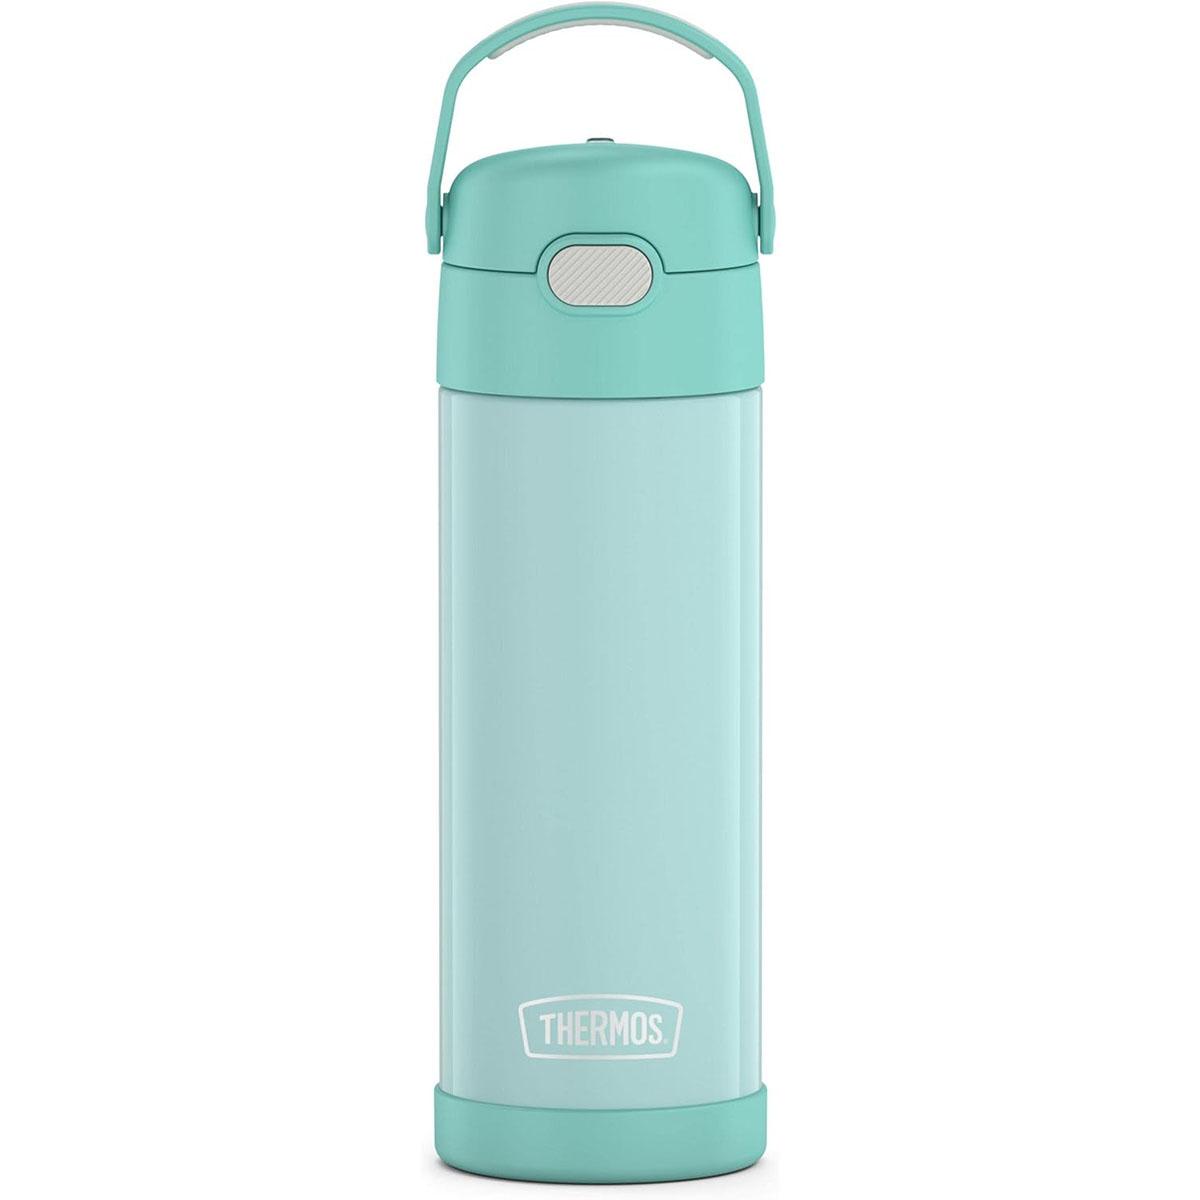 Thermos Funtainer 16oz Stainless Steel Vacuum Insulated Bottle for $12.49